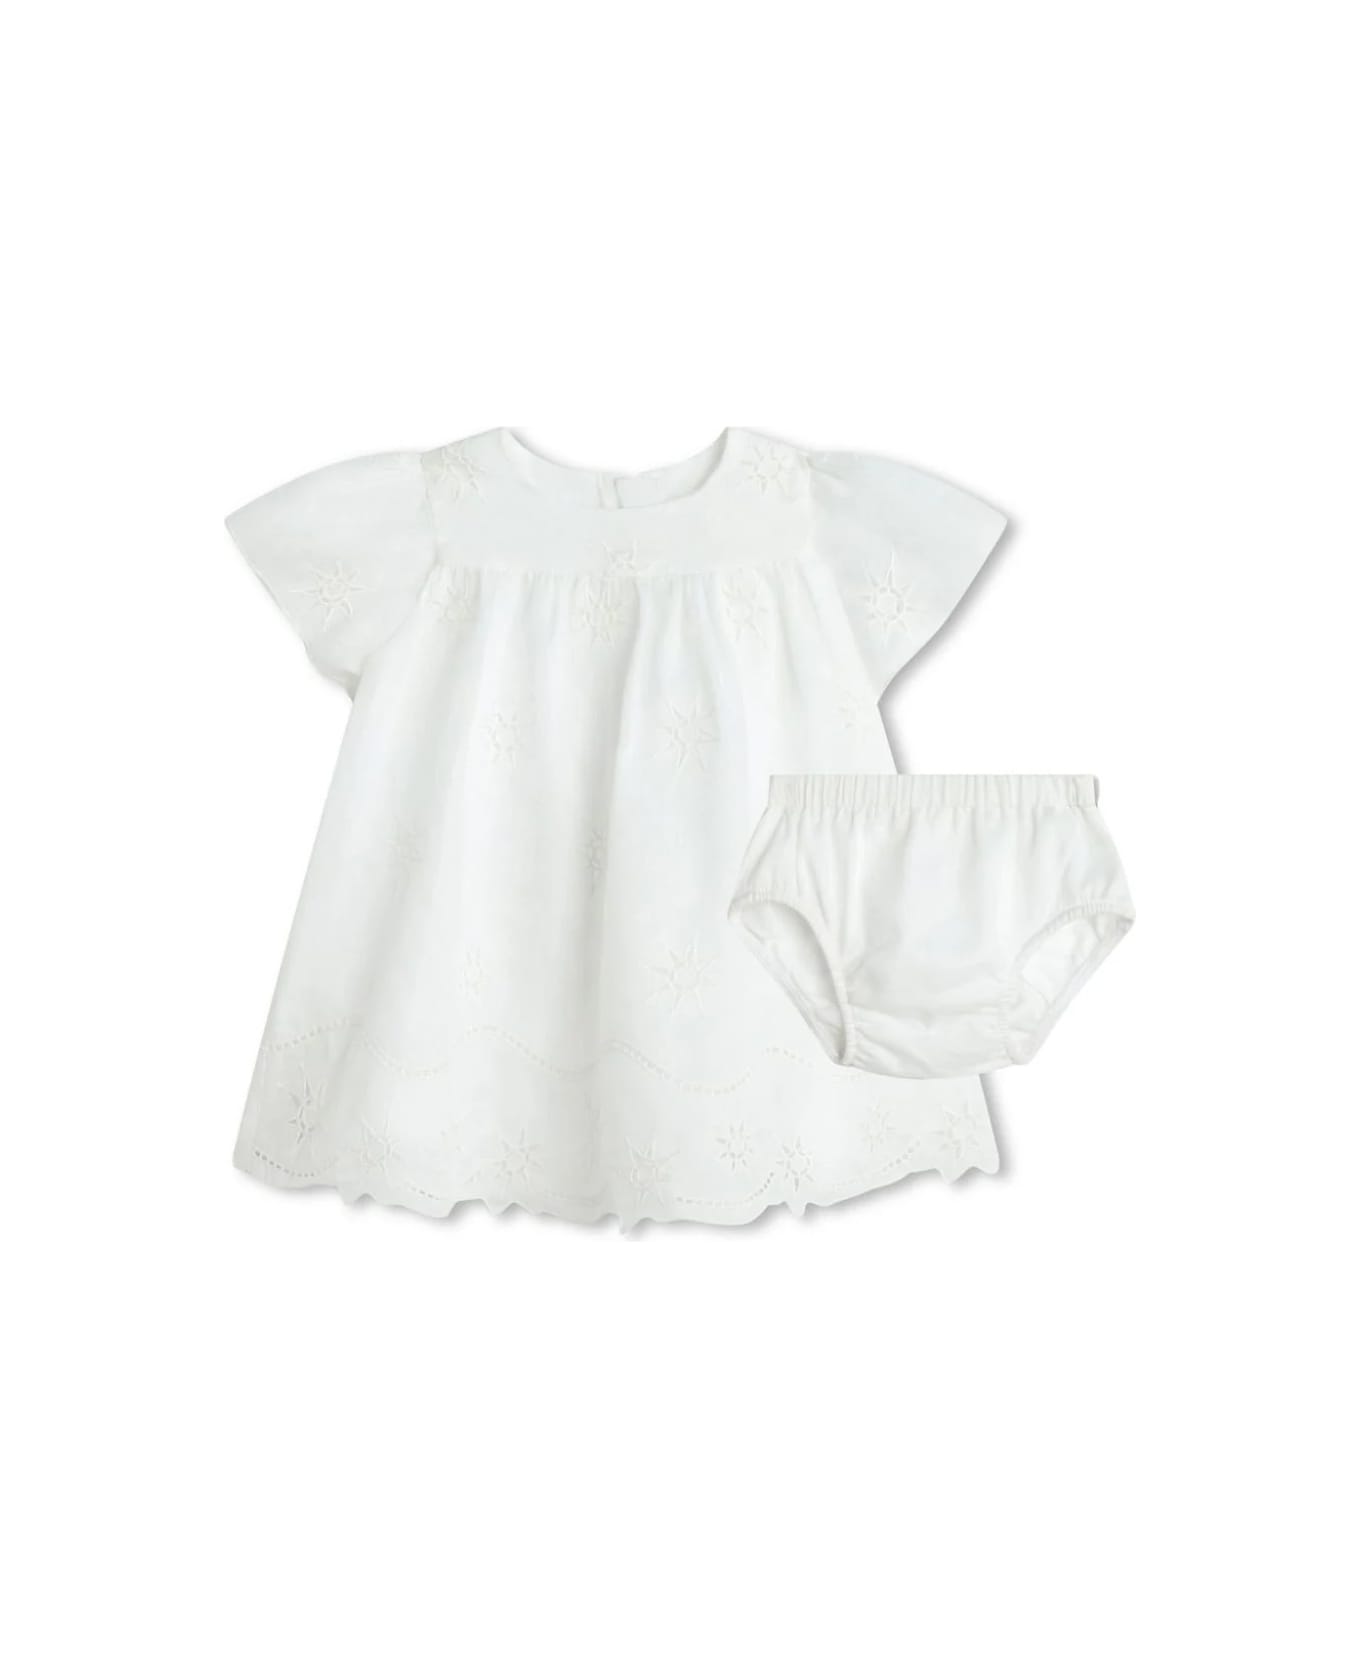 Chloé White Dress With Embroidered Stars - White ボディスーツ＆セットアップ